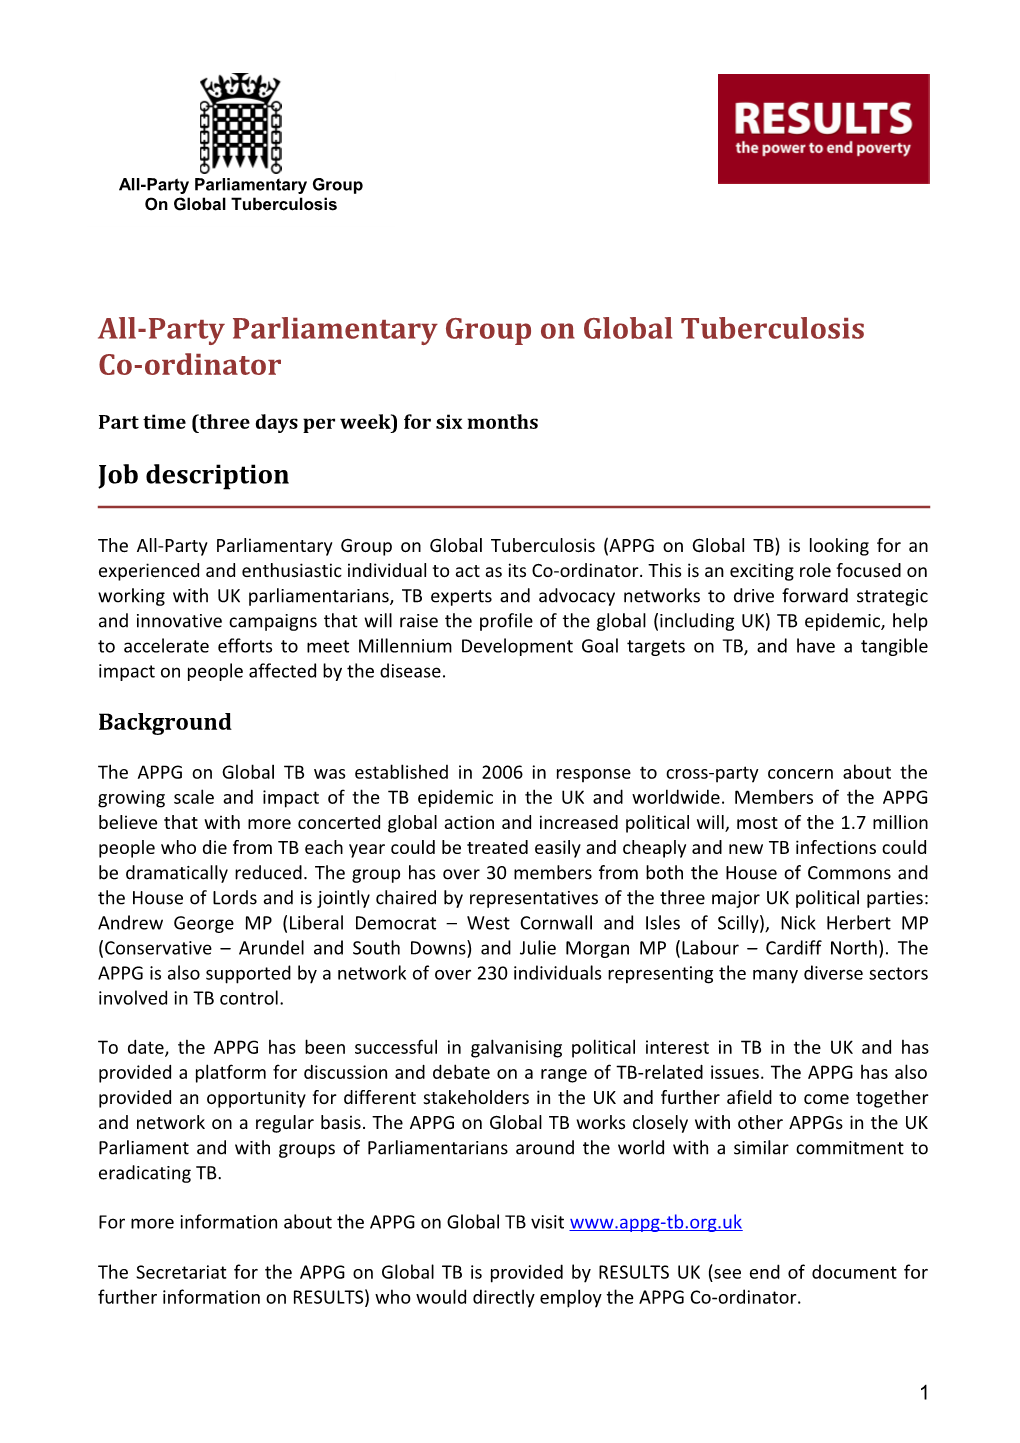 All-Party Parliamentary Group on Global Tuberculosis